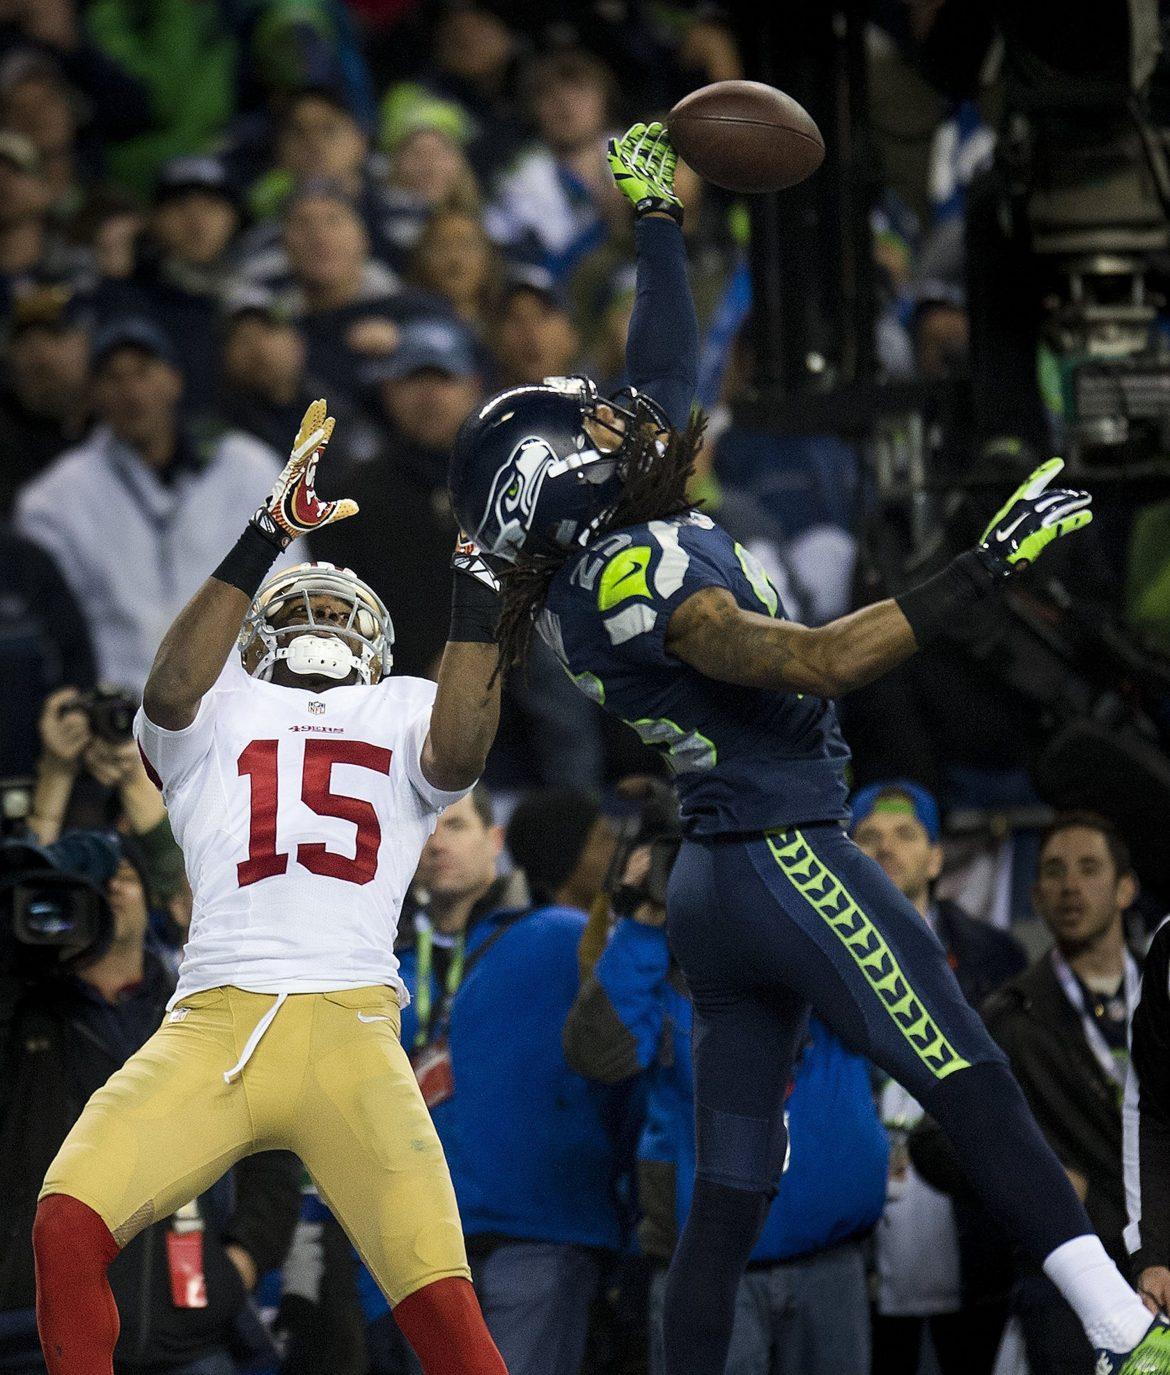 The Seattle Seahawks and San Francisco 49ers are still the class of the NFC, but both have questions to face in 2014.